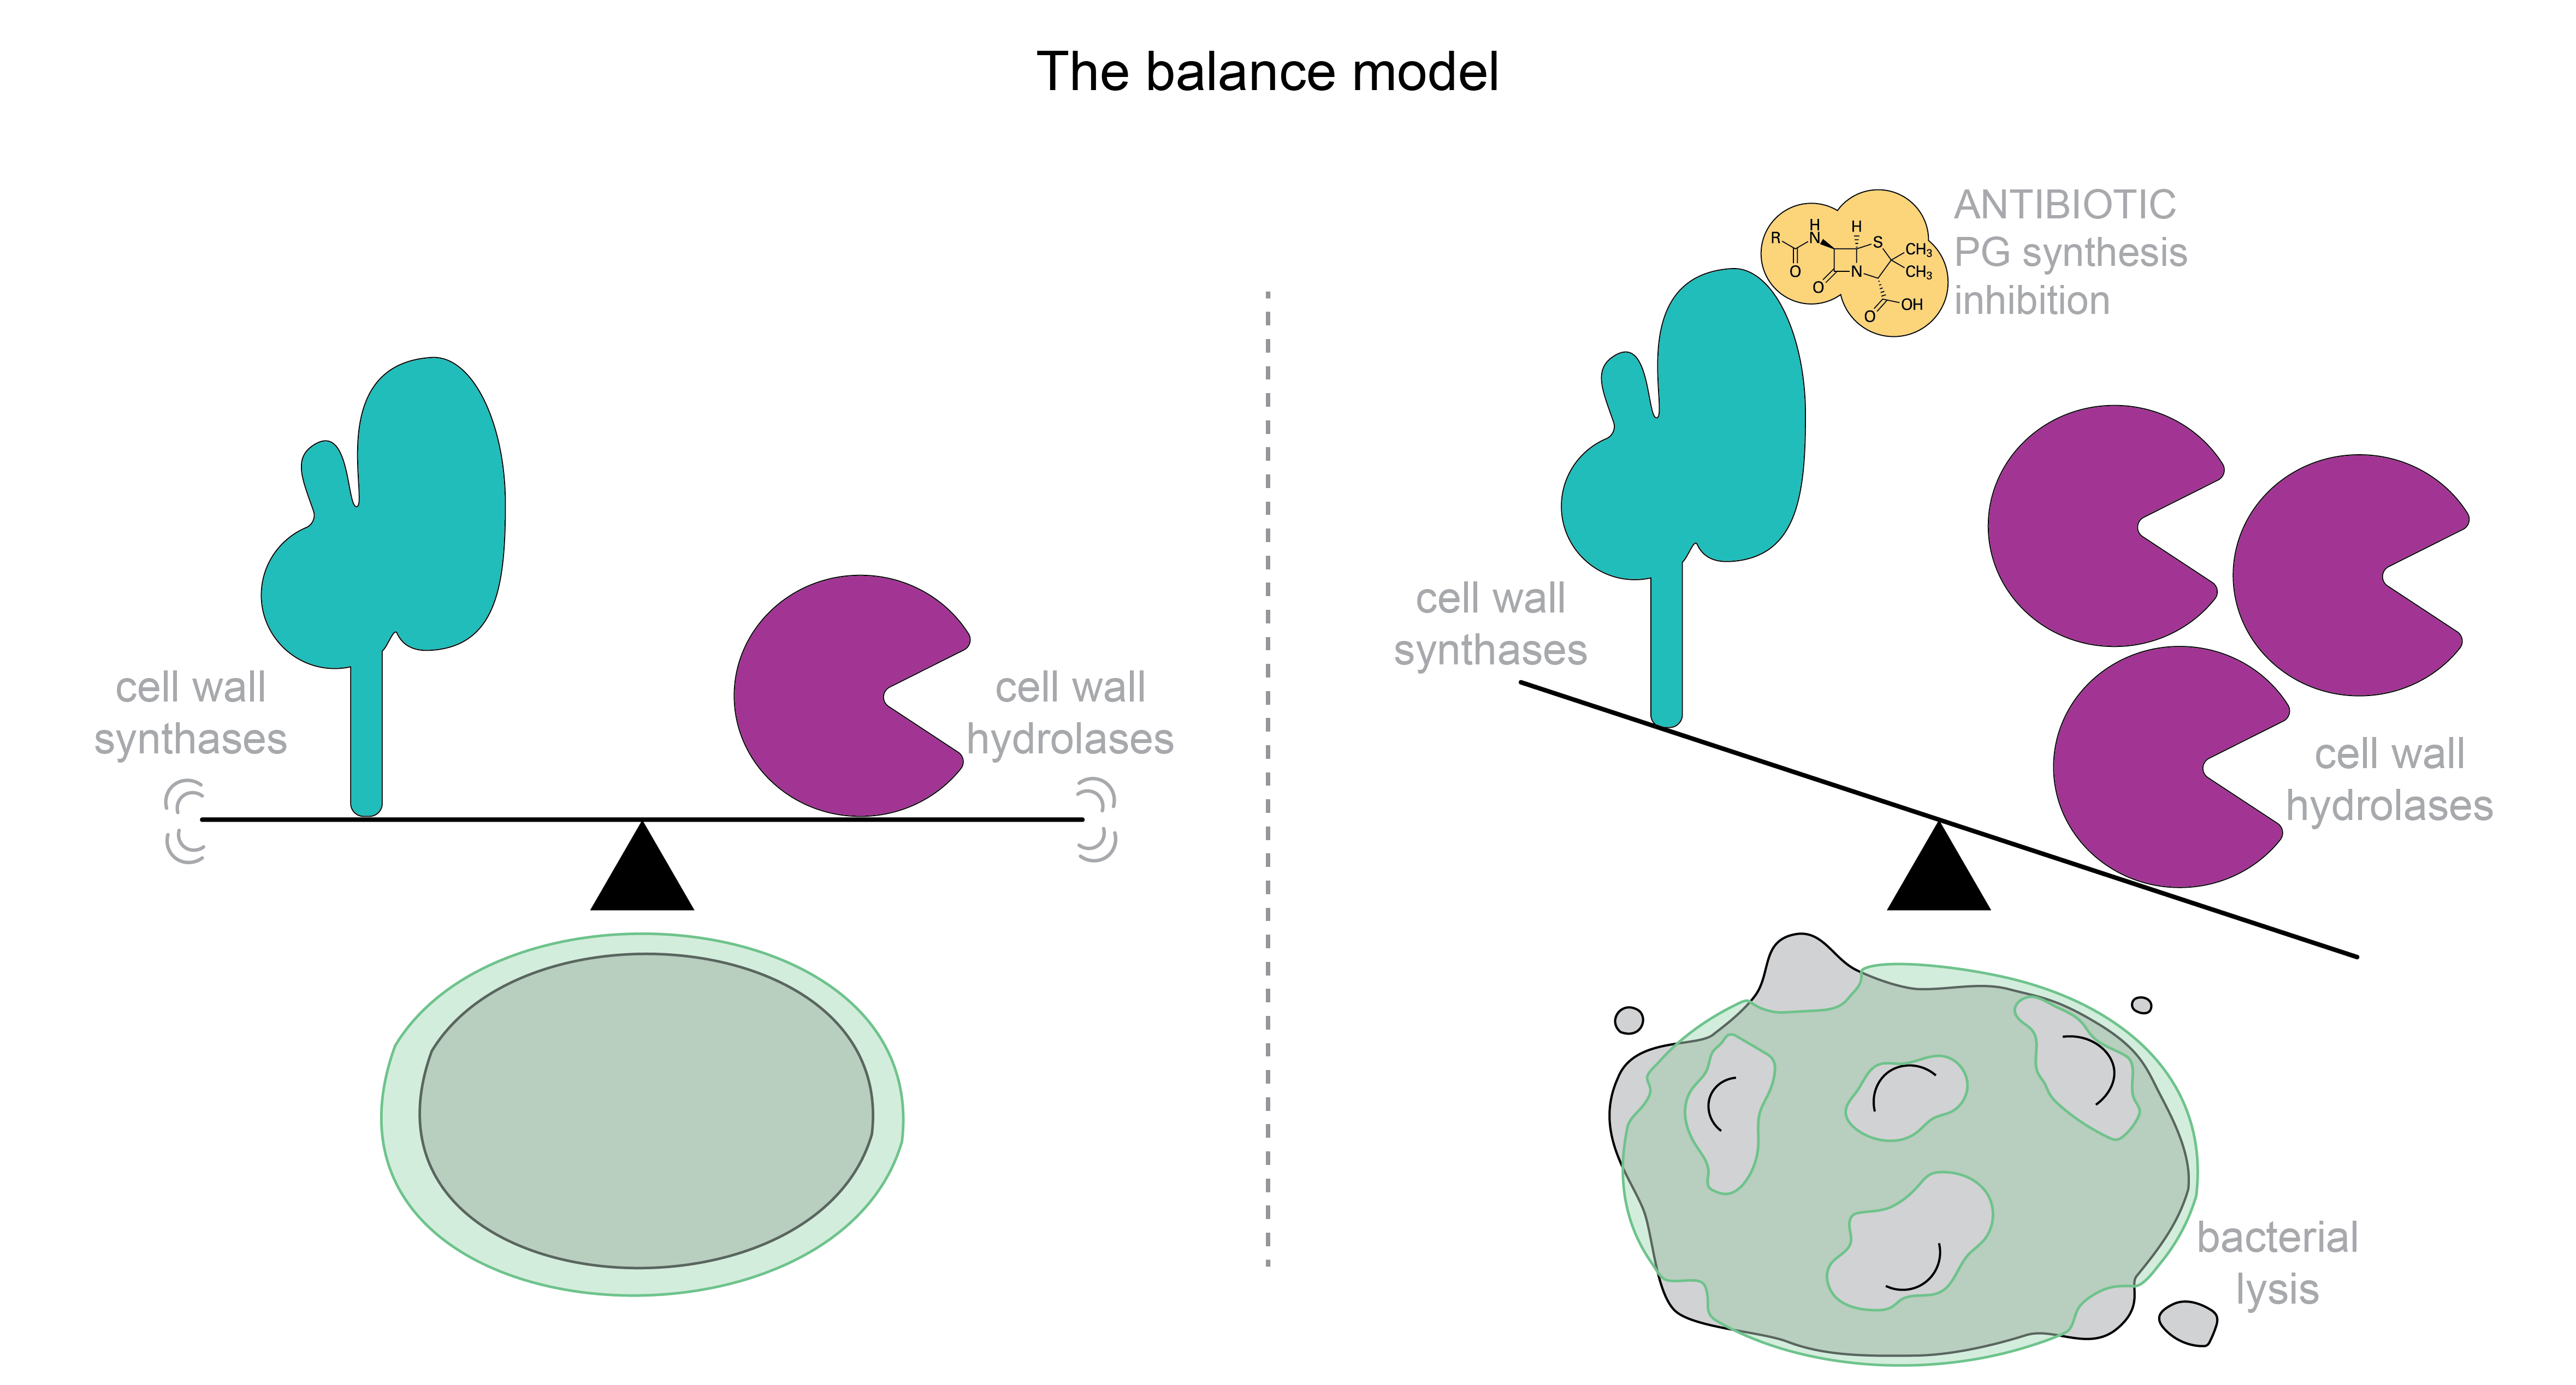 To the left, the balance model of cell wall growth in bacteria. On the right a schematic representation of a unbalanced cell wall growth with increased lytic enzymatic function. 